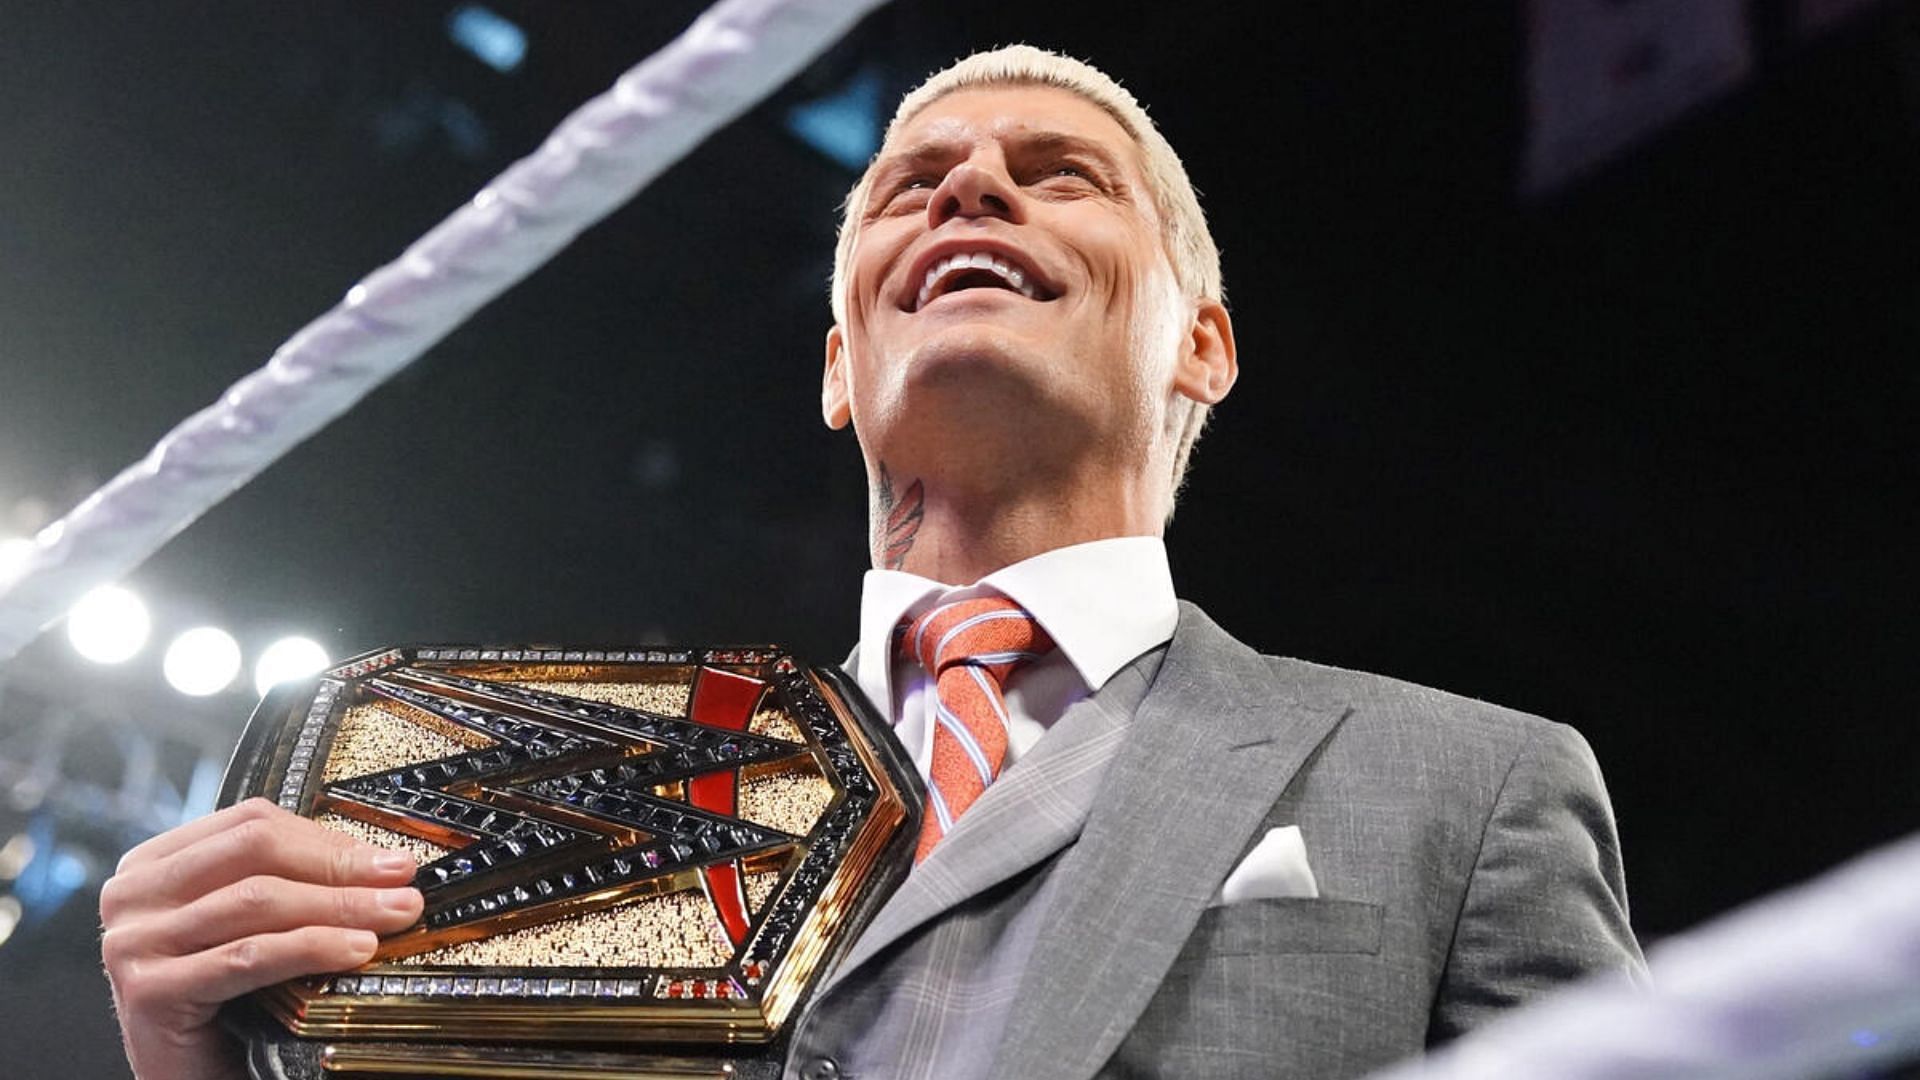 Cody Rhodes is the Undisputed WWE Champion (Credit: WWE)